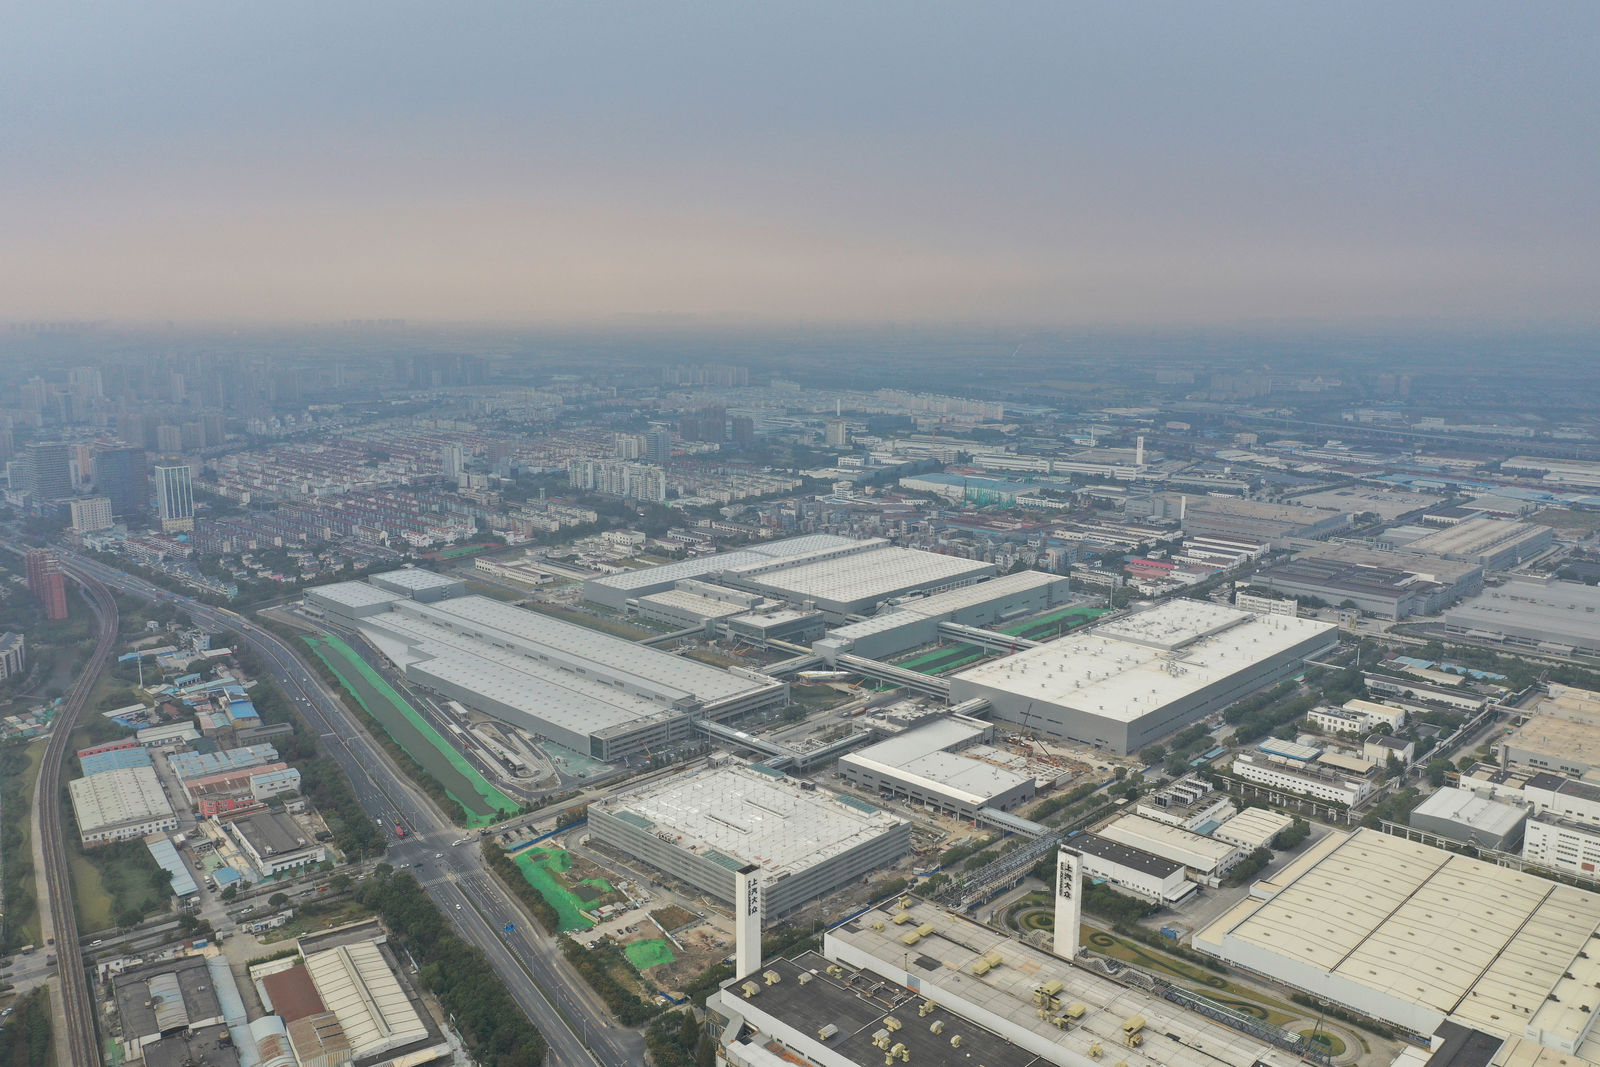 Volkswagen starts pre-production in first plant purely focused on e-mobility in China